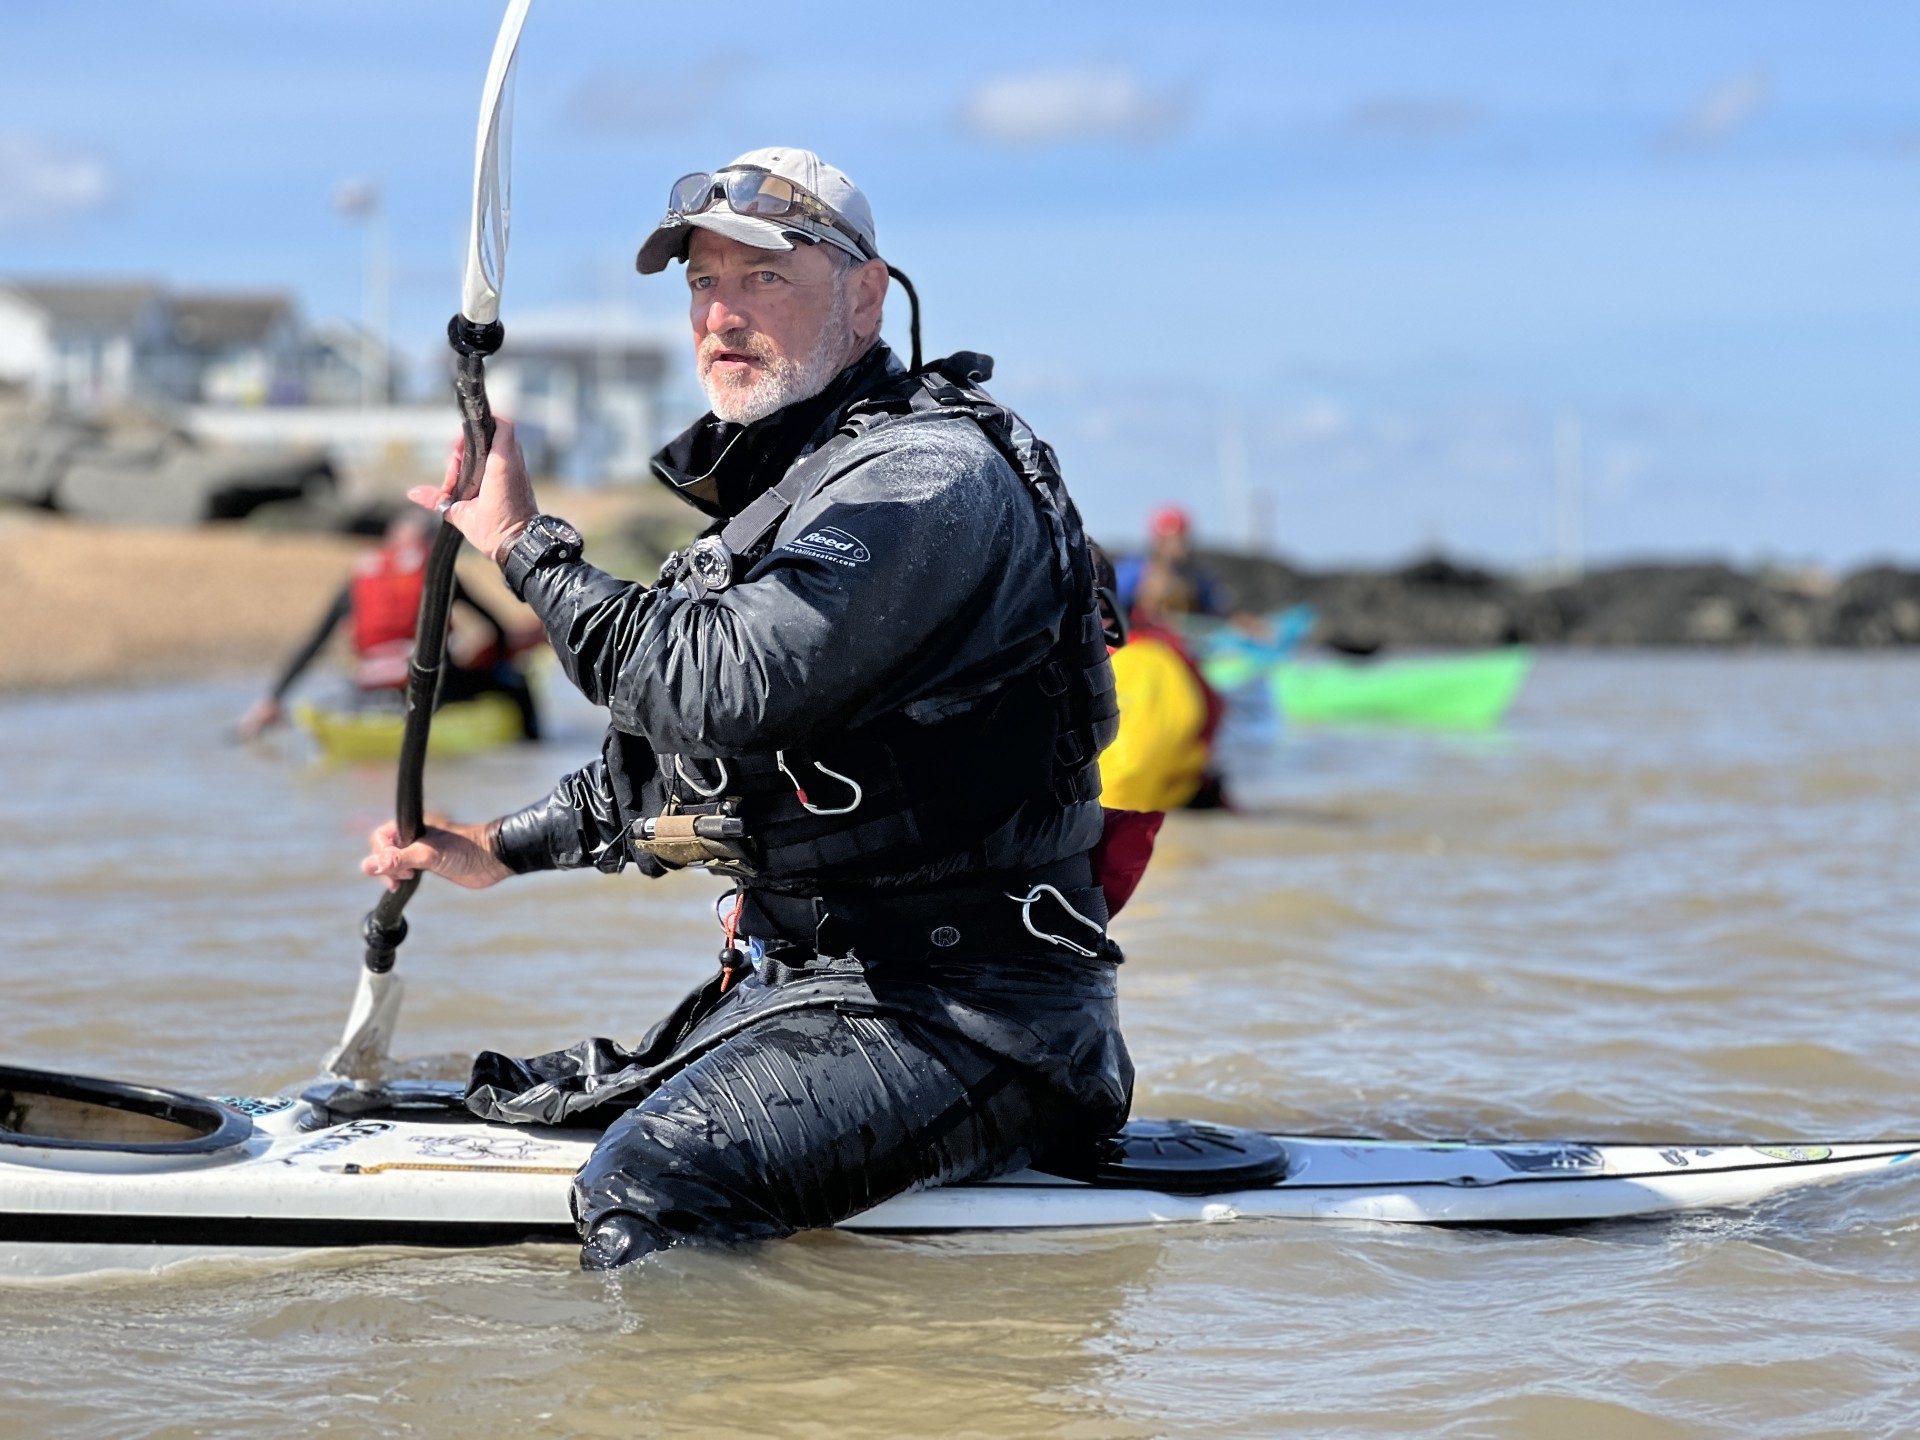 A sea kayaker balancing on the back deck of his kayak dressed in a drysuit.